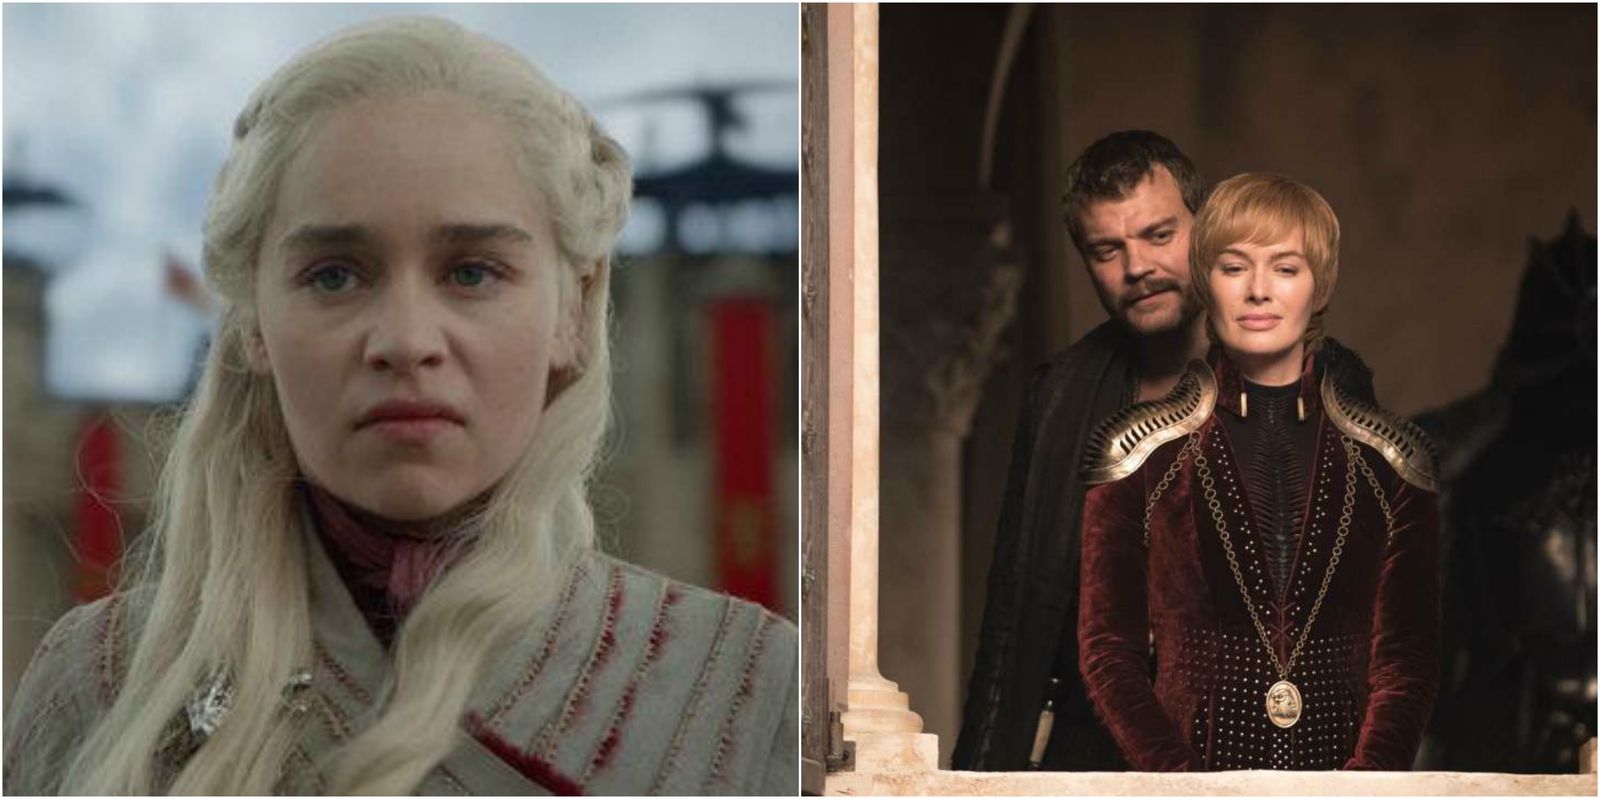 Game of Thrones Season 8 Episode 4 Review: Too Much Happens In Westeros But Somehow The Impact Does Not Feel Strong Enough